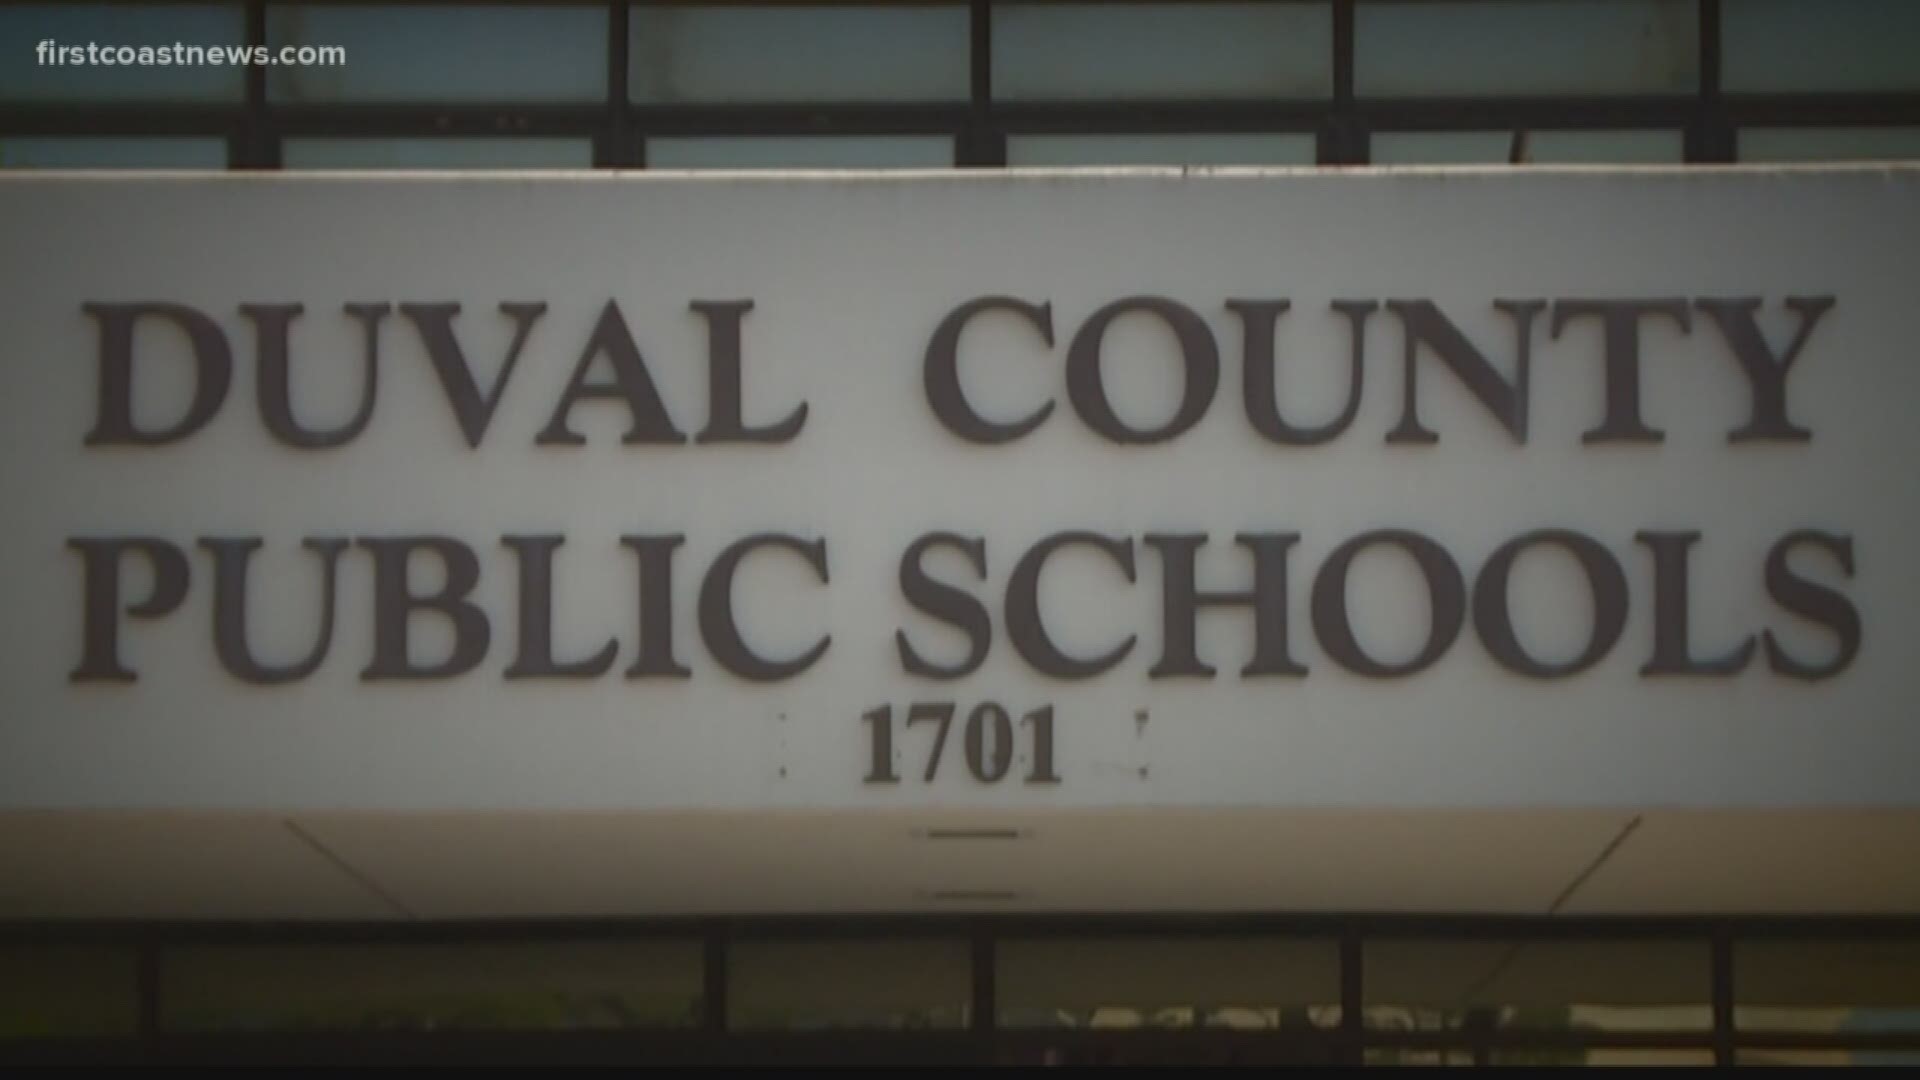 Duval County Public Schools announced metal detectors for high schools will only be used under certain circumstances.